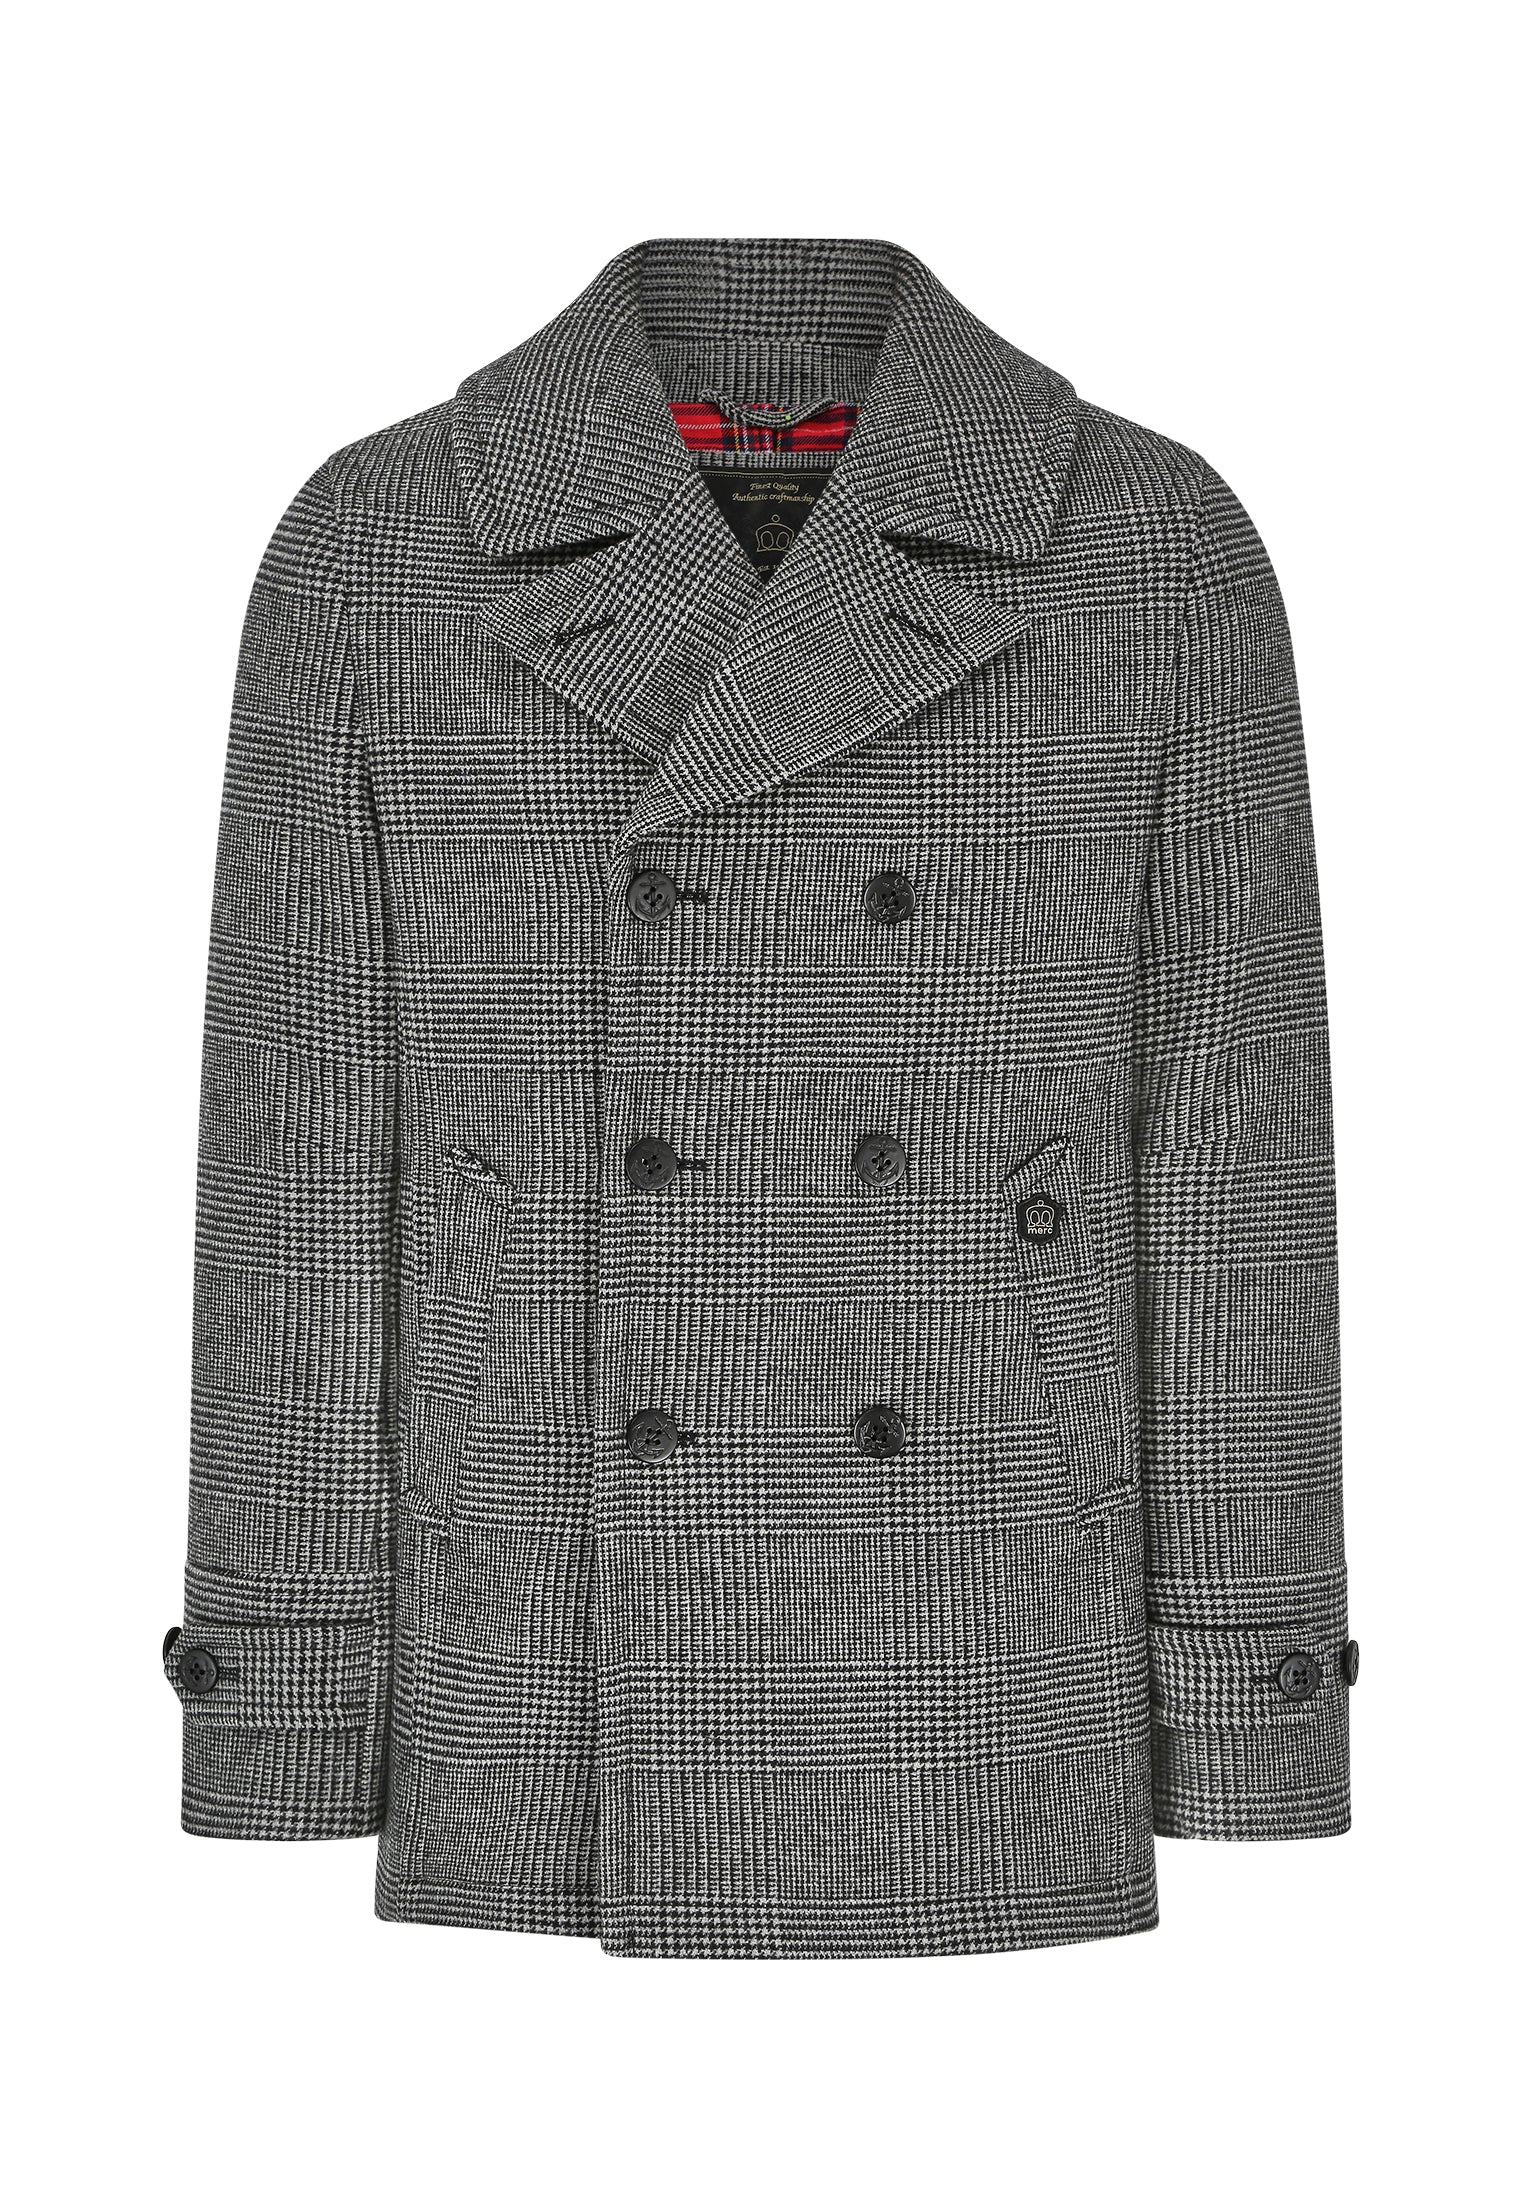 Prince of Wales Peacoat Front by Merc London